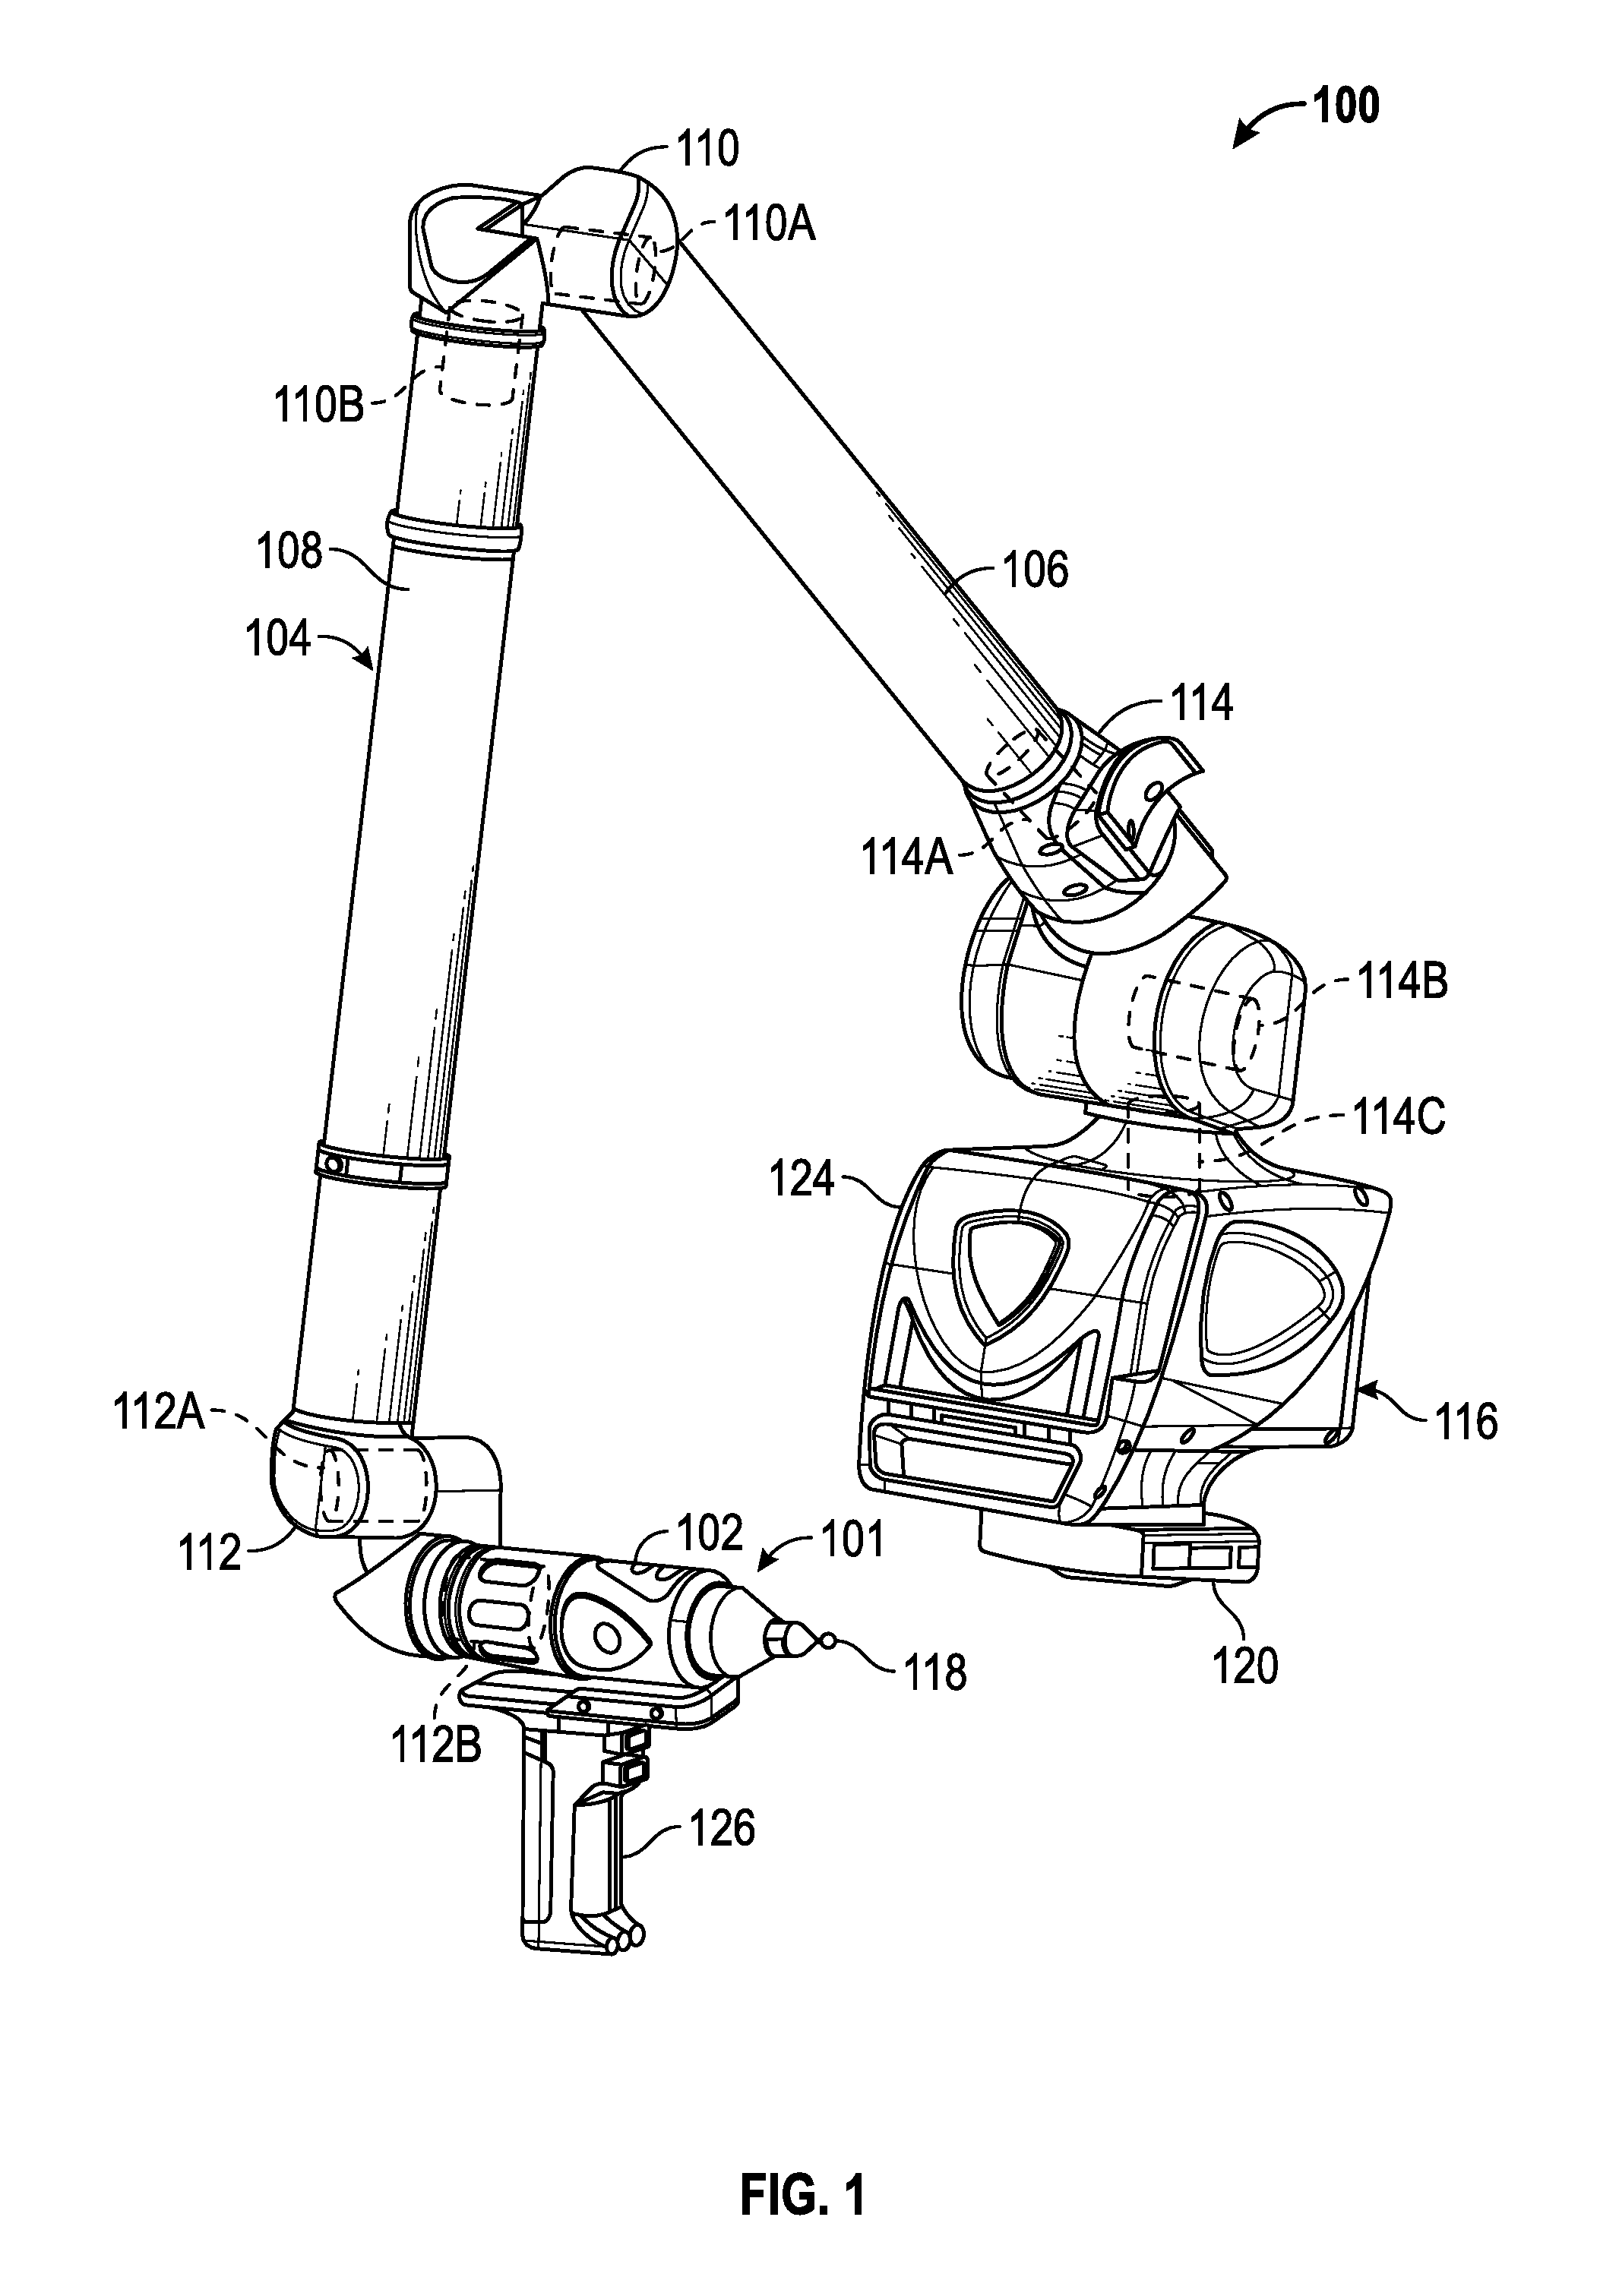 Metrology device and a method for compensating for bearing runout error